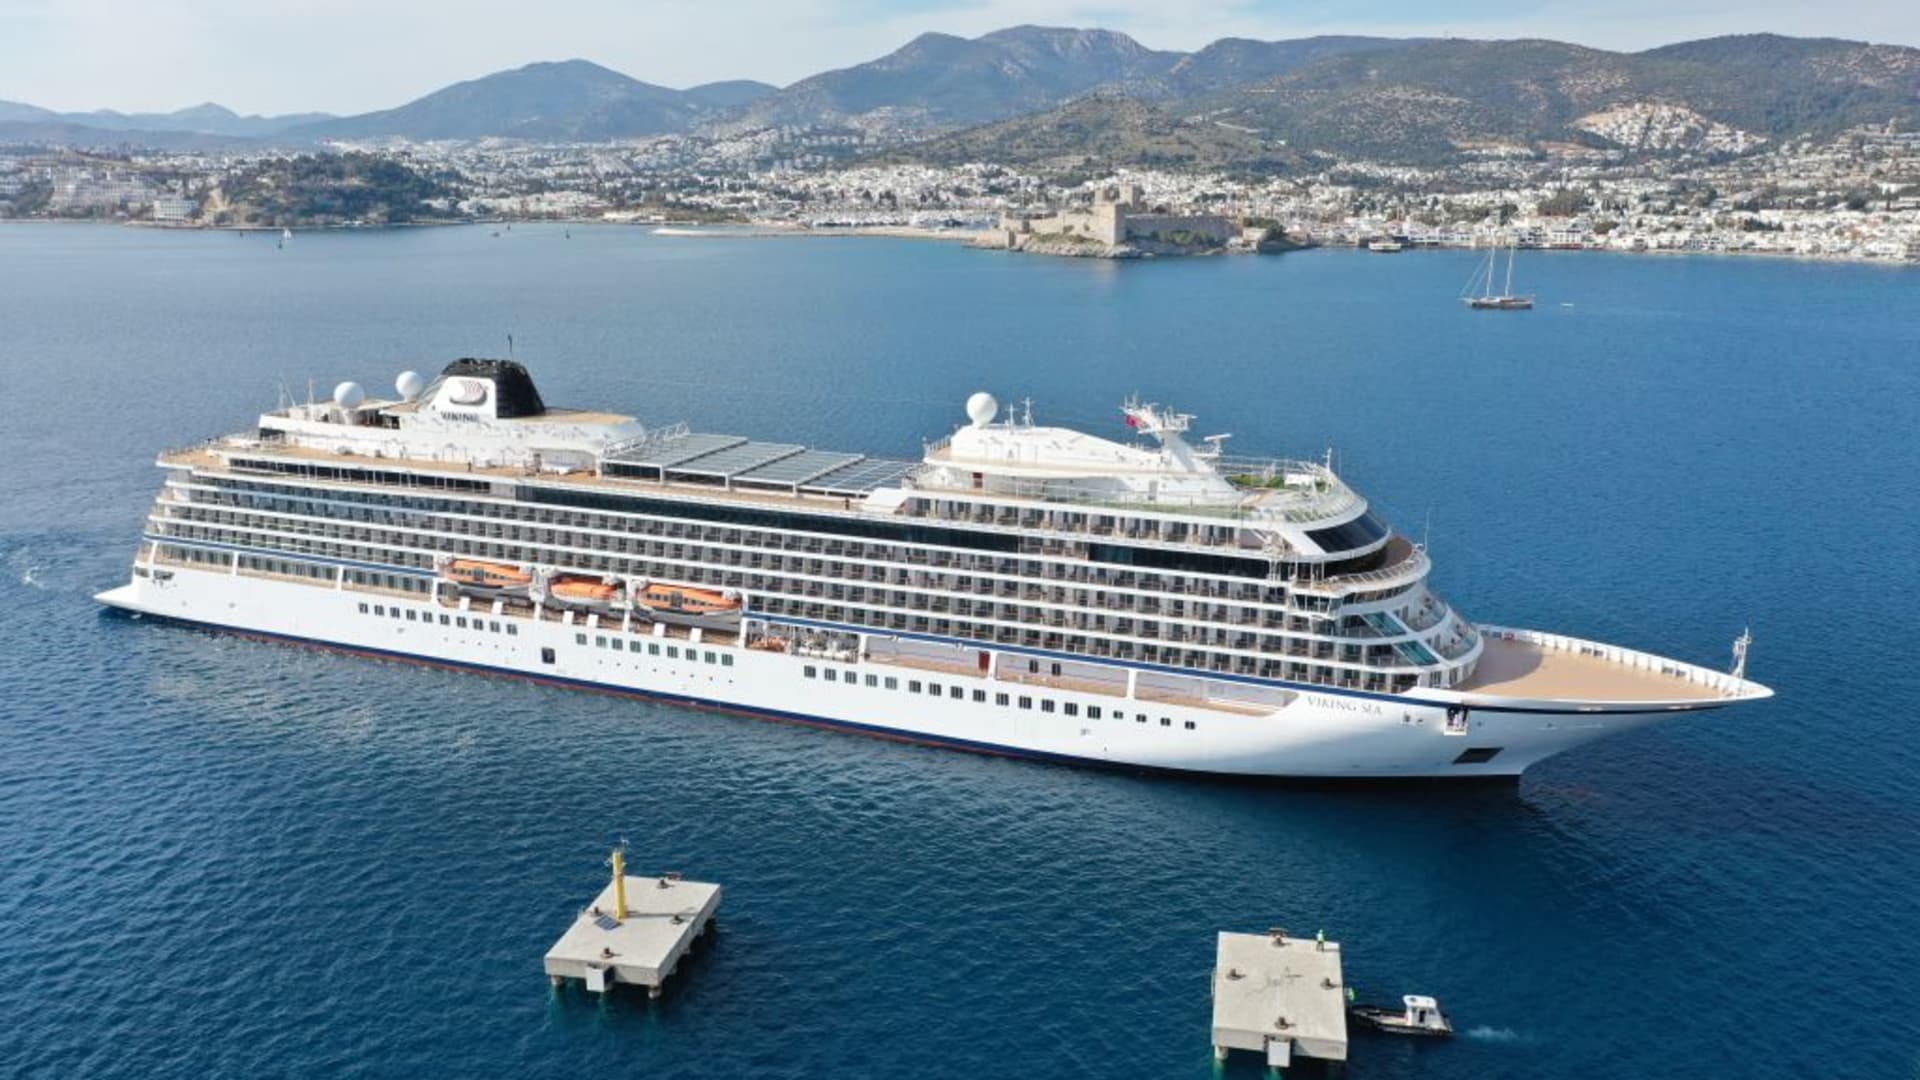 The Viking Sea cruise ship arrives at Bodrum Cruise Port in Mugla, Turkey on March 13, 2021.